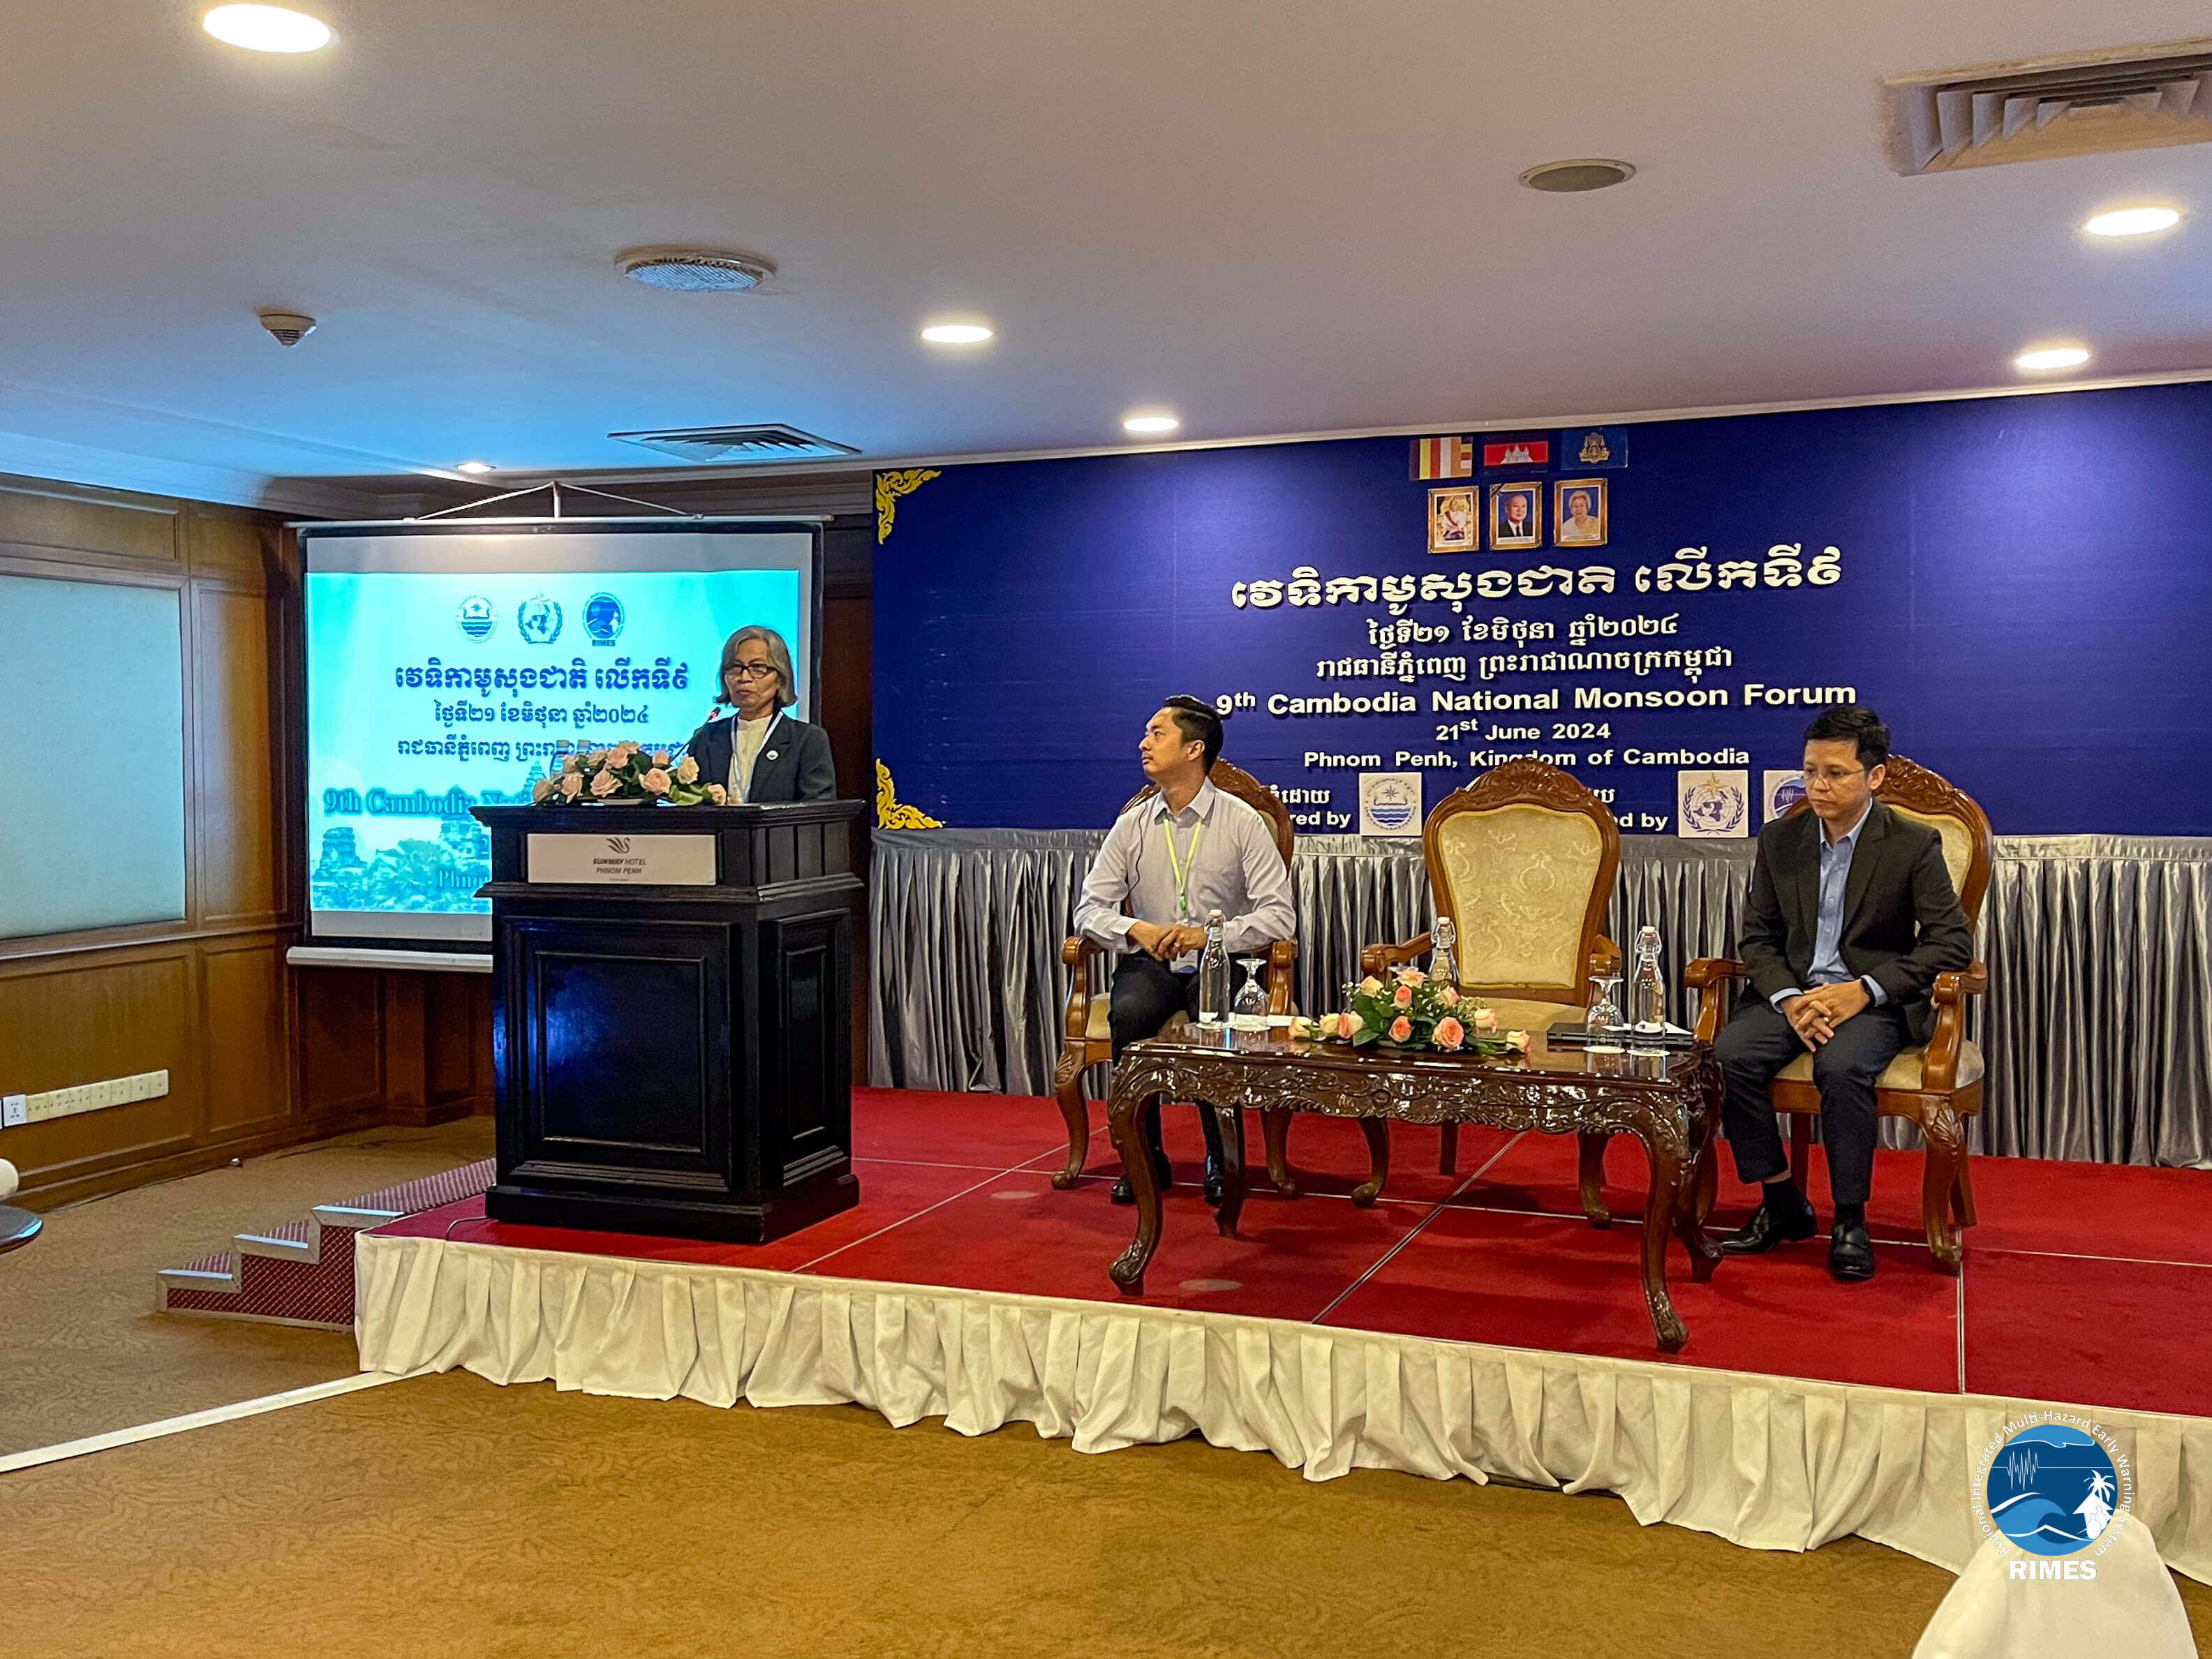 Her Excellency Dr. Seth Vannareth delivers the opening message during the 9th Cambodia National Monsoon Forum